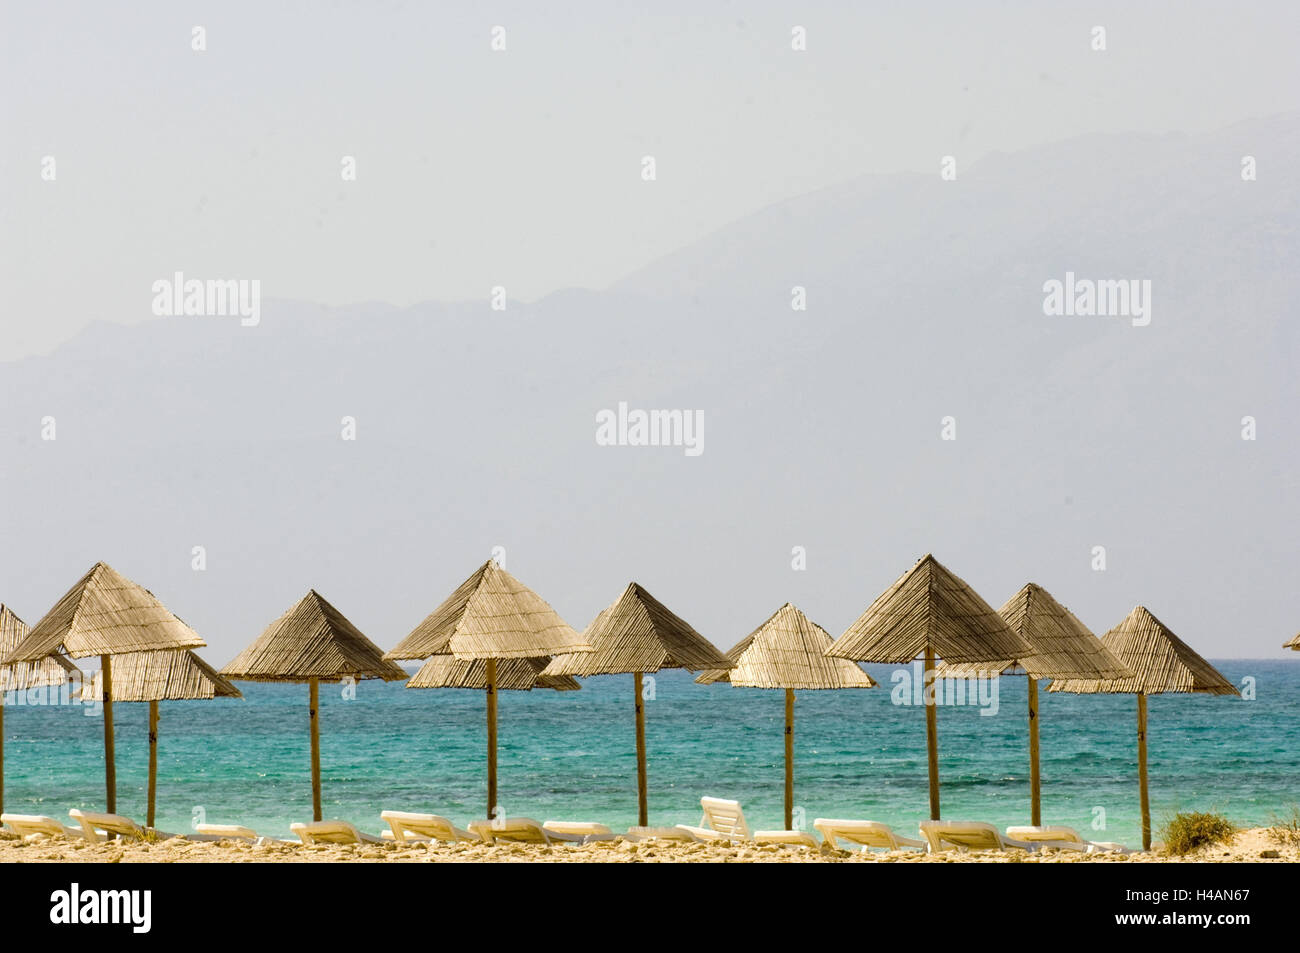 Greece, Crete, Ireapetra, the unoccupied island Chrissi, Bade3strand, lying and sunshades, Stock Photo